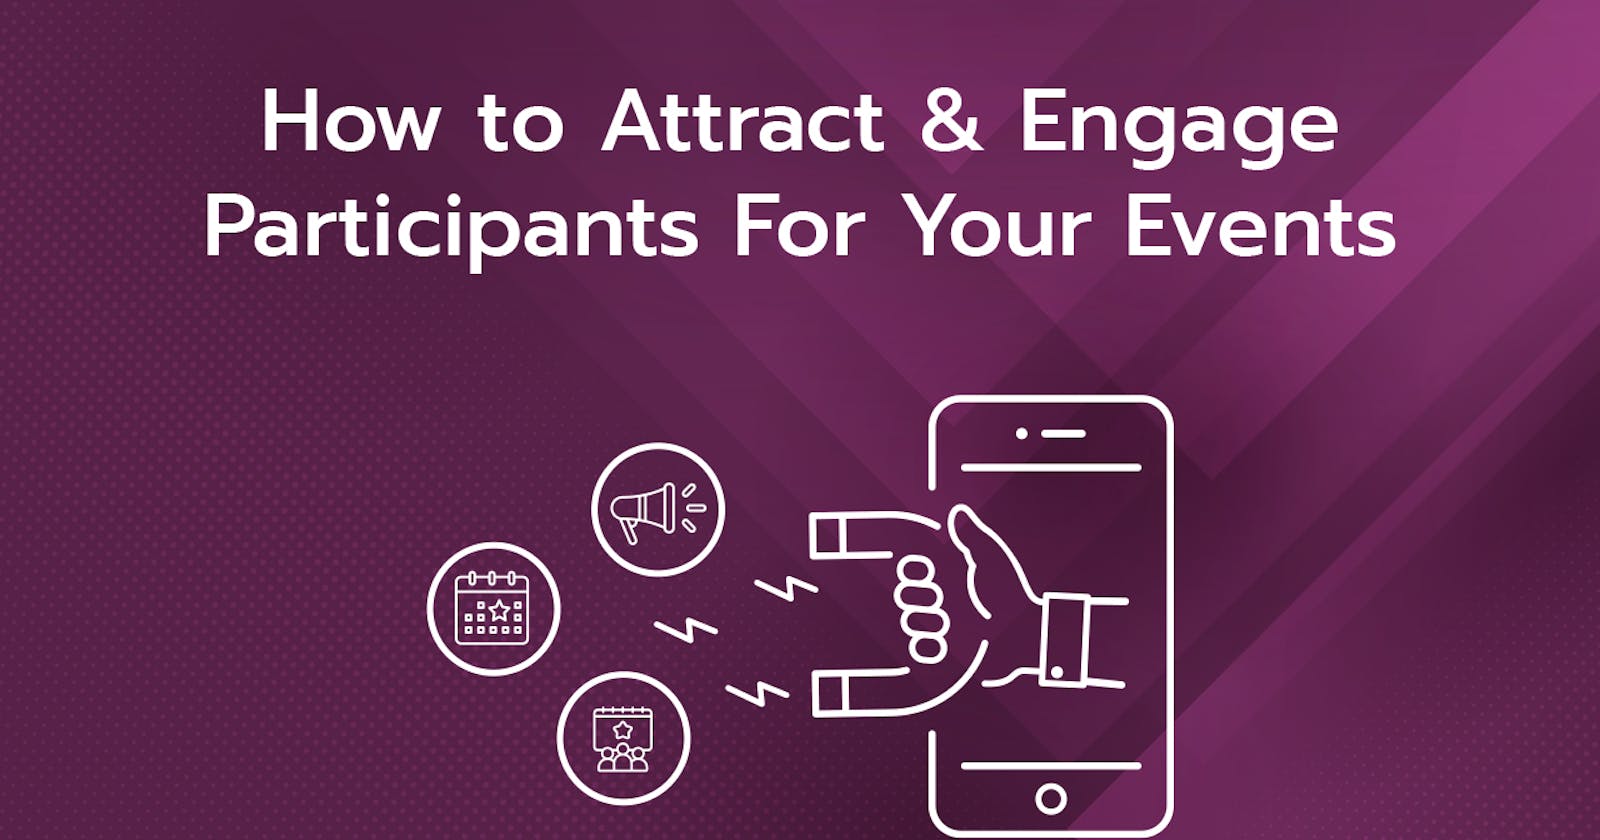 How to Attract & Engage Participants For Your Events